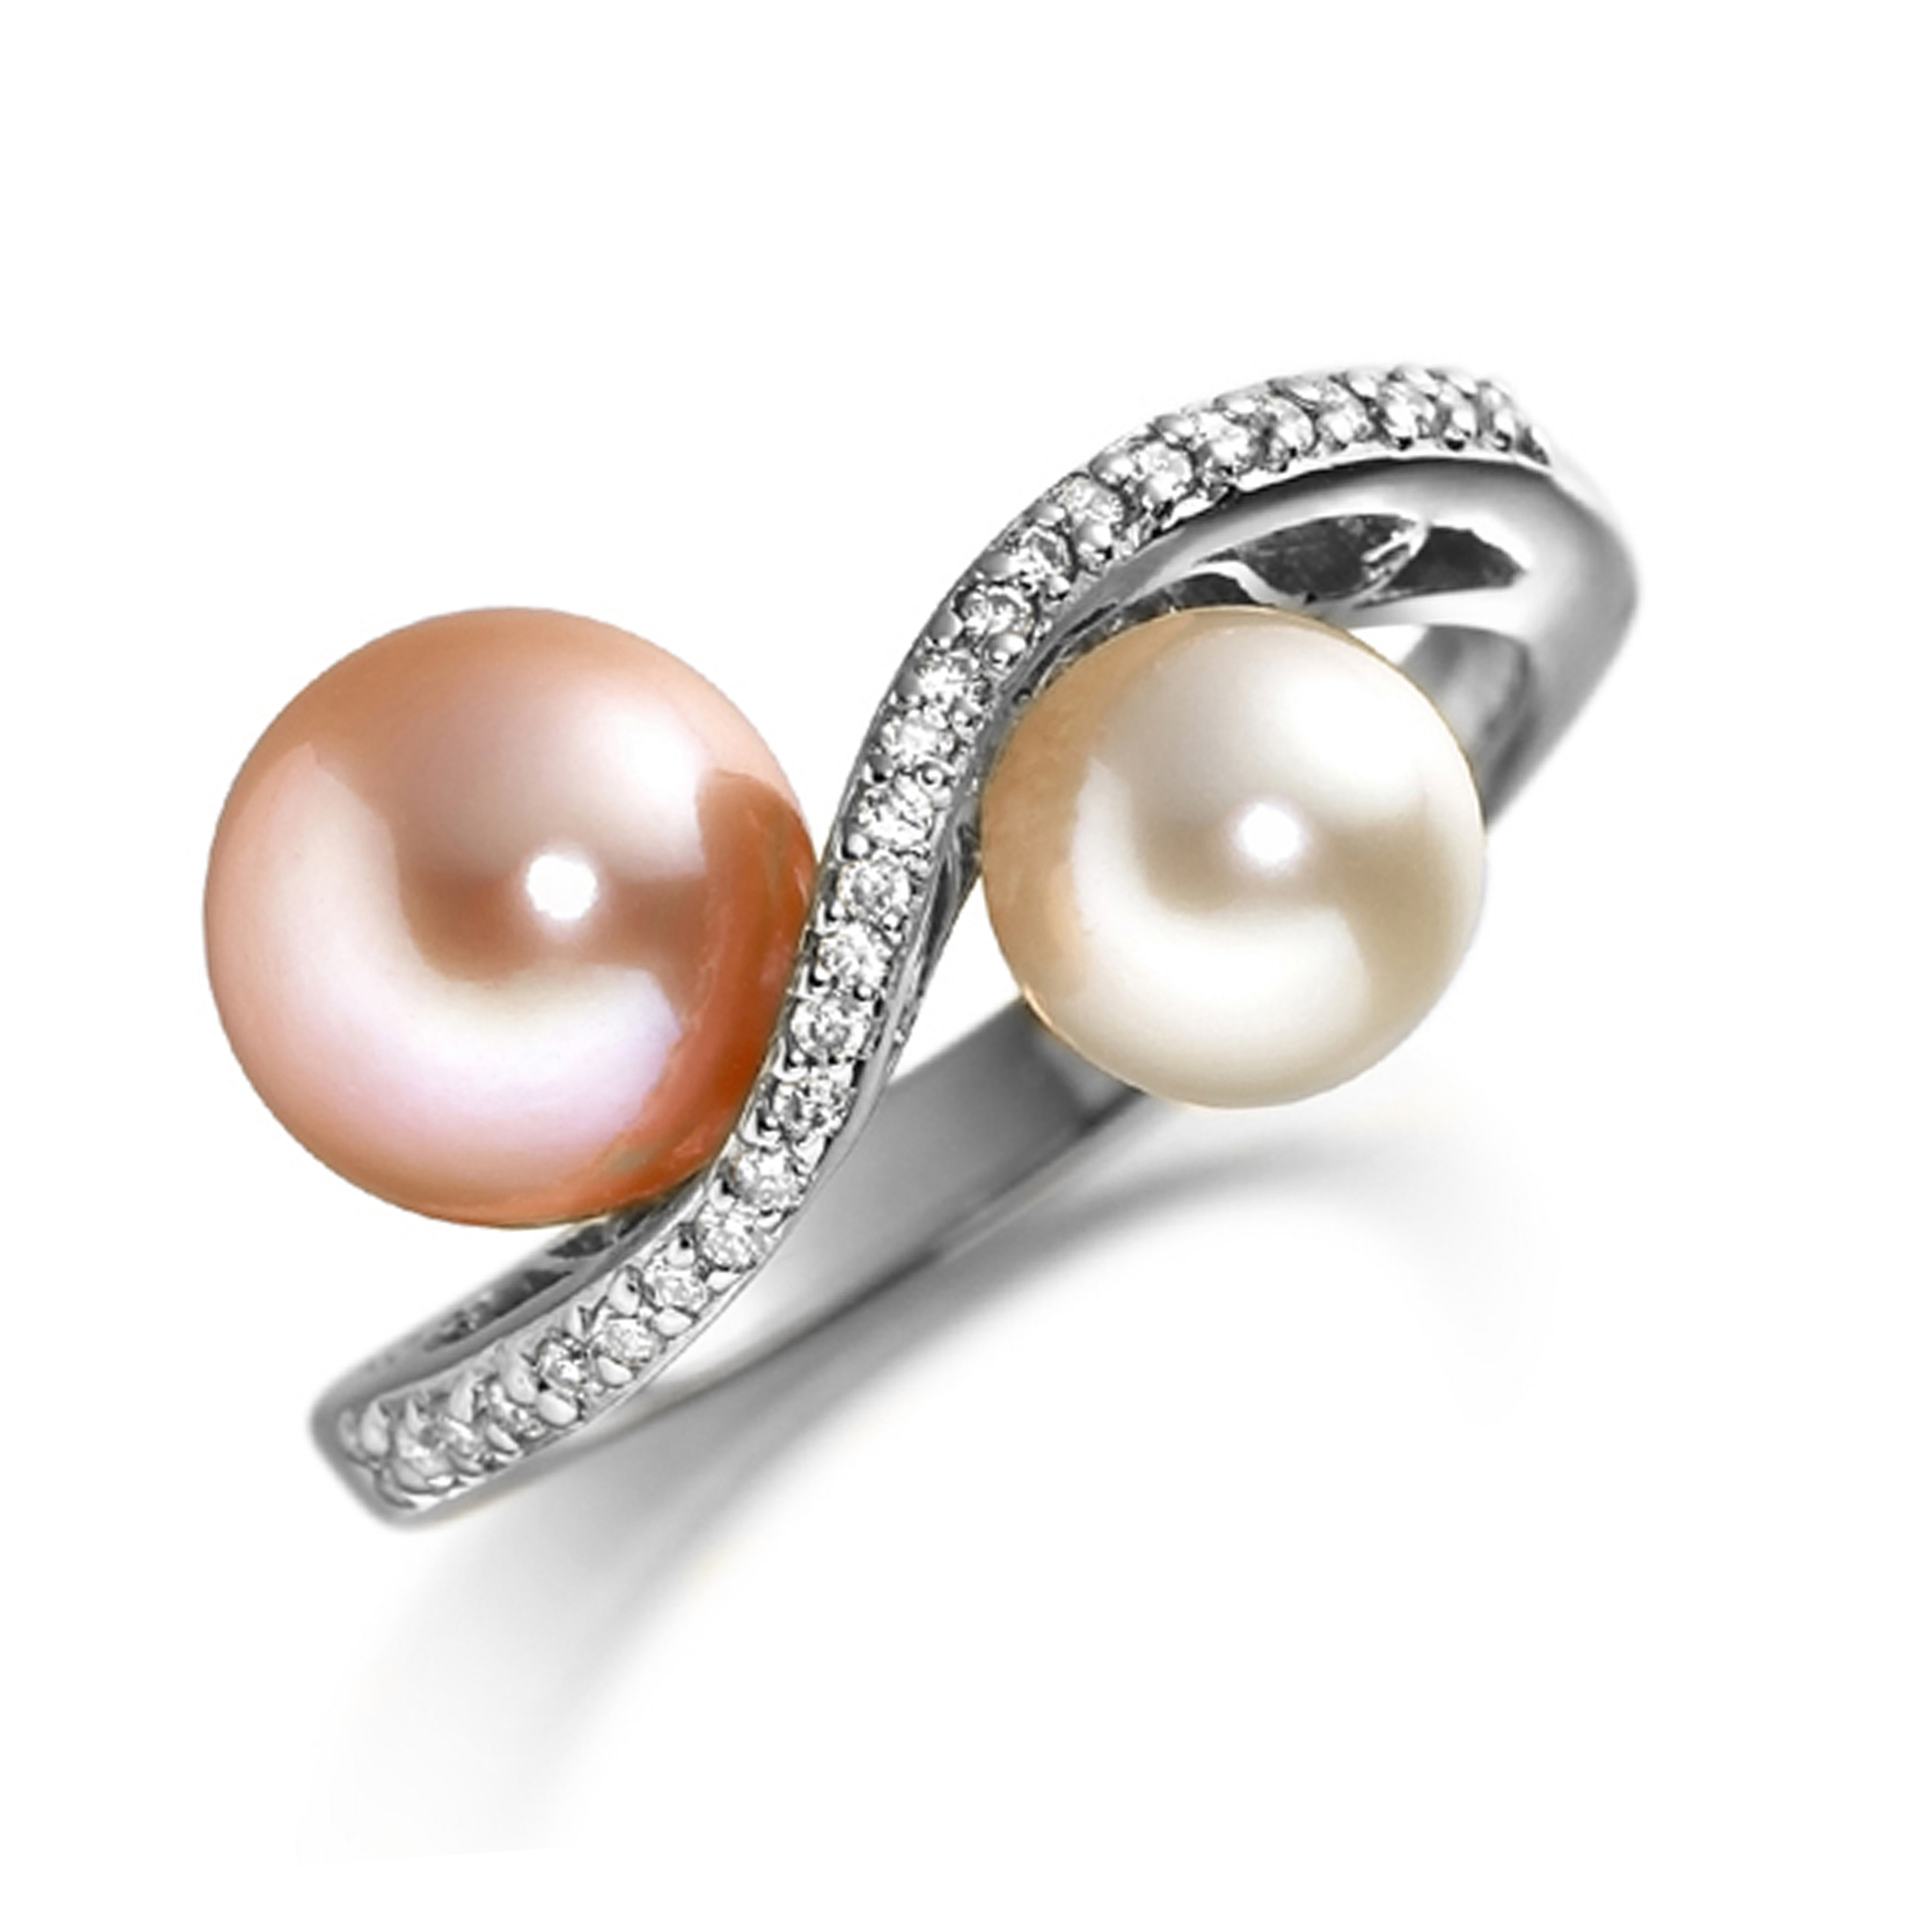 7mm Round Pearl Stones On Shoulder Diamond And Pearl Engagement Ring